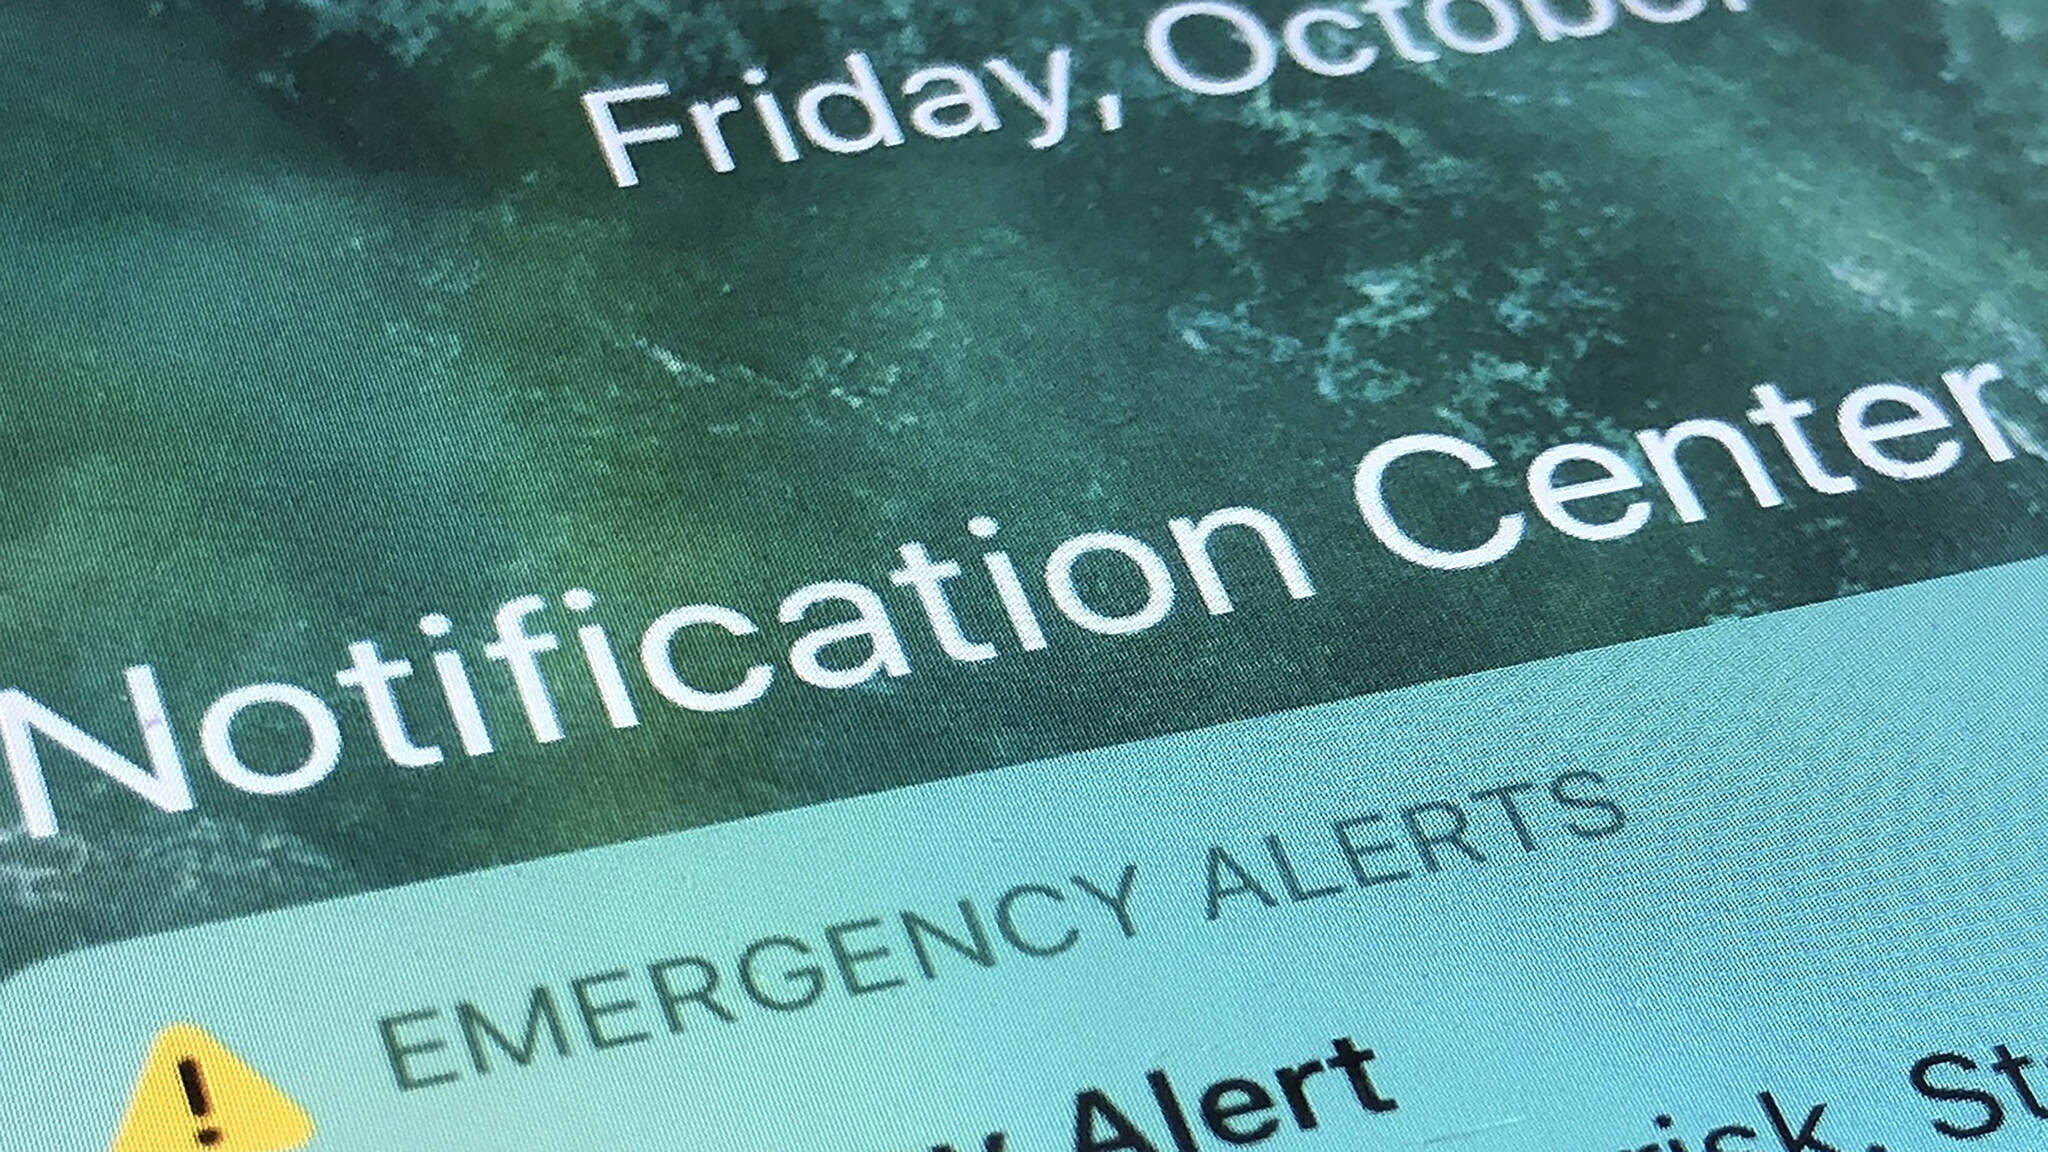 An emergency alert is displayed on a cellphone, Oct. 30, 2020, in Rio Rancho, N.M. (AP Photo/Susan Montoya Bryan, File)